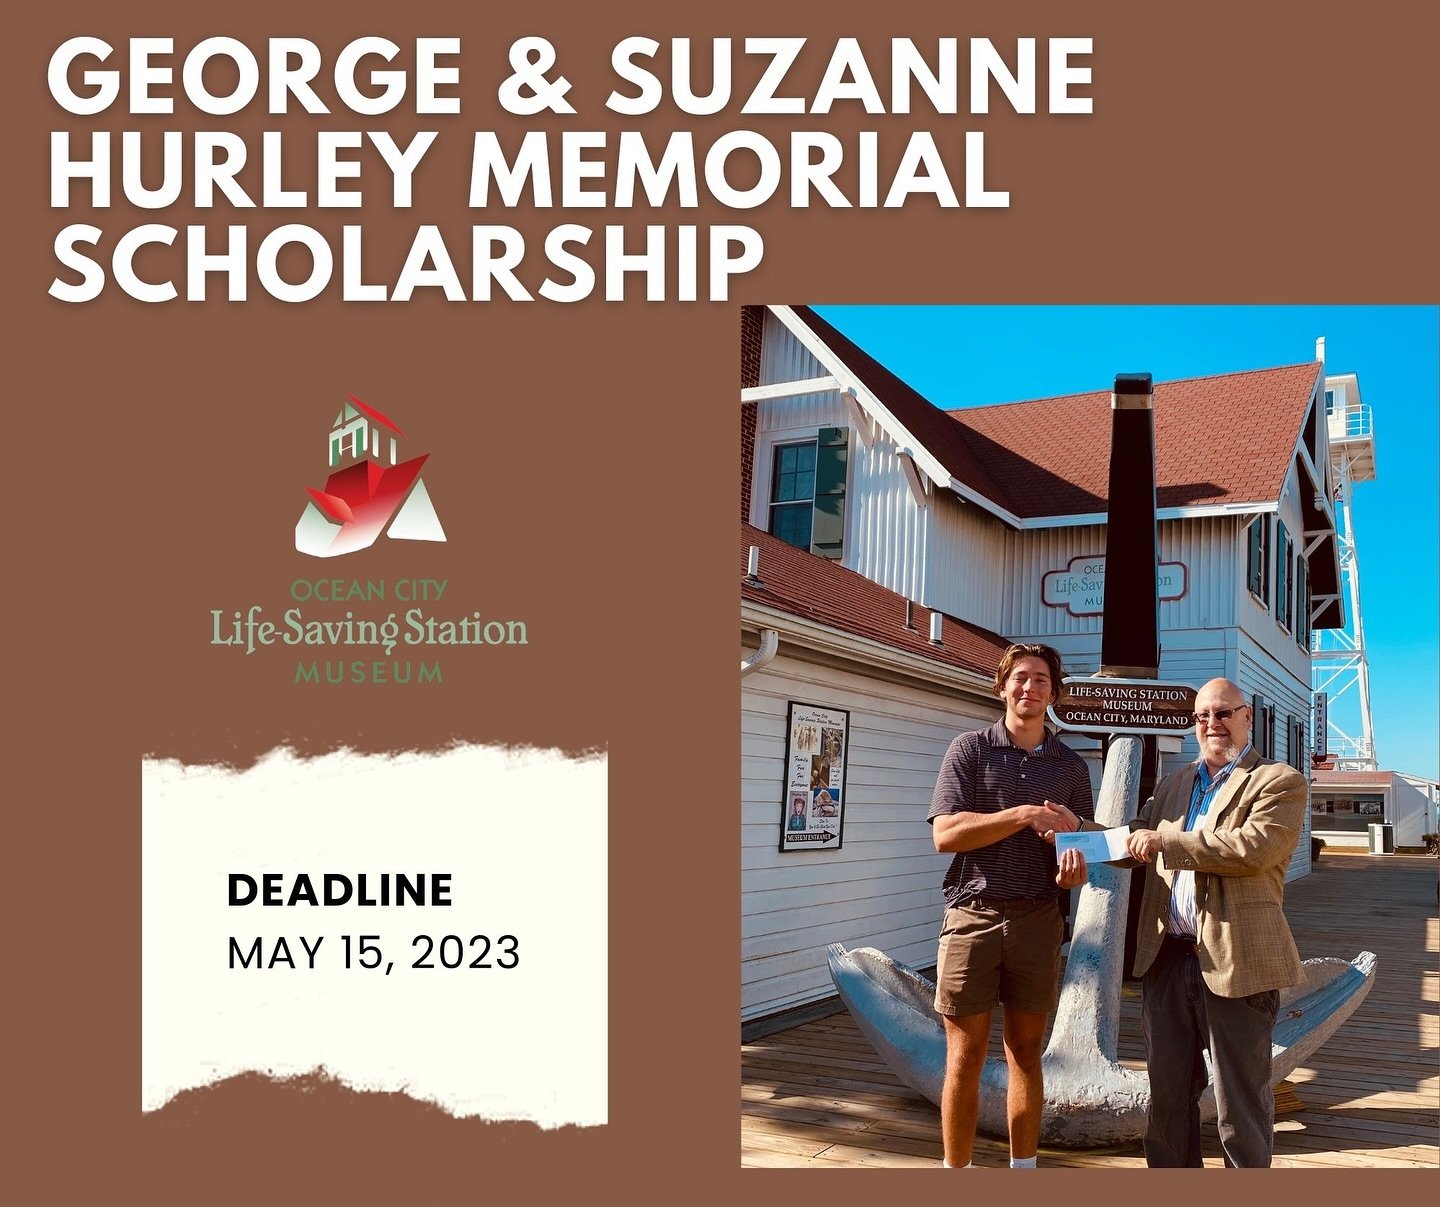 Last chance to apply for the scholarship! 

The George &amp; Suzanne Hurley Memorial Scholarship in the amount of $2,000 is awarded to a graduating senior of Stephen Decatur High School, Worcester Preparatory School, Pocomoke High School, and Snow Hi